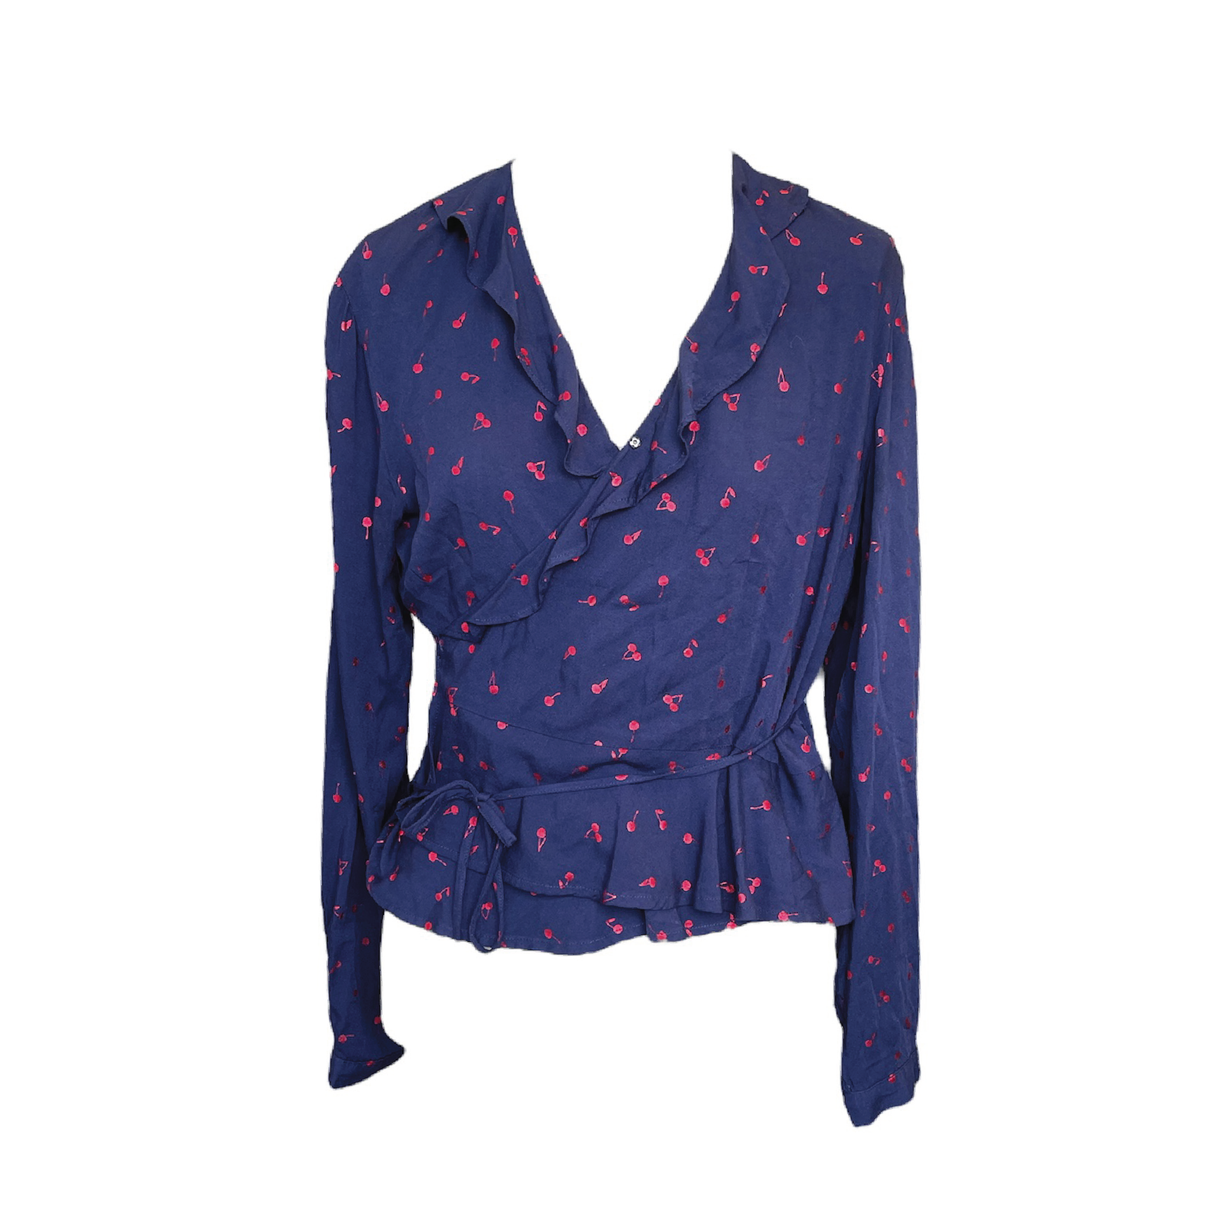 A Second Chance - Rails M Shirt Navy Blue Women - Delivery All OVer Lebanon